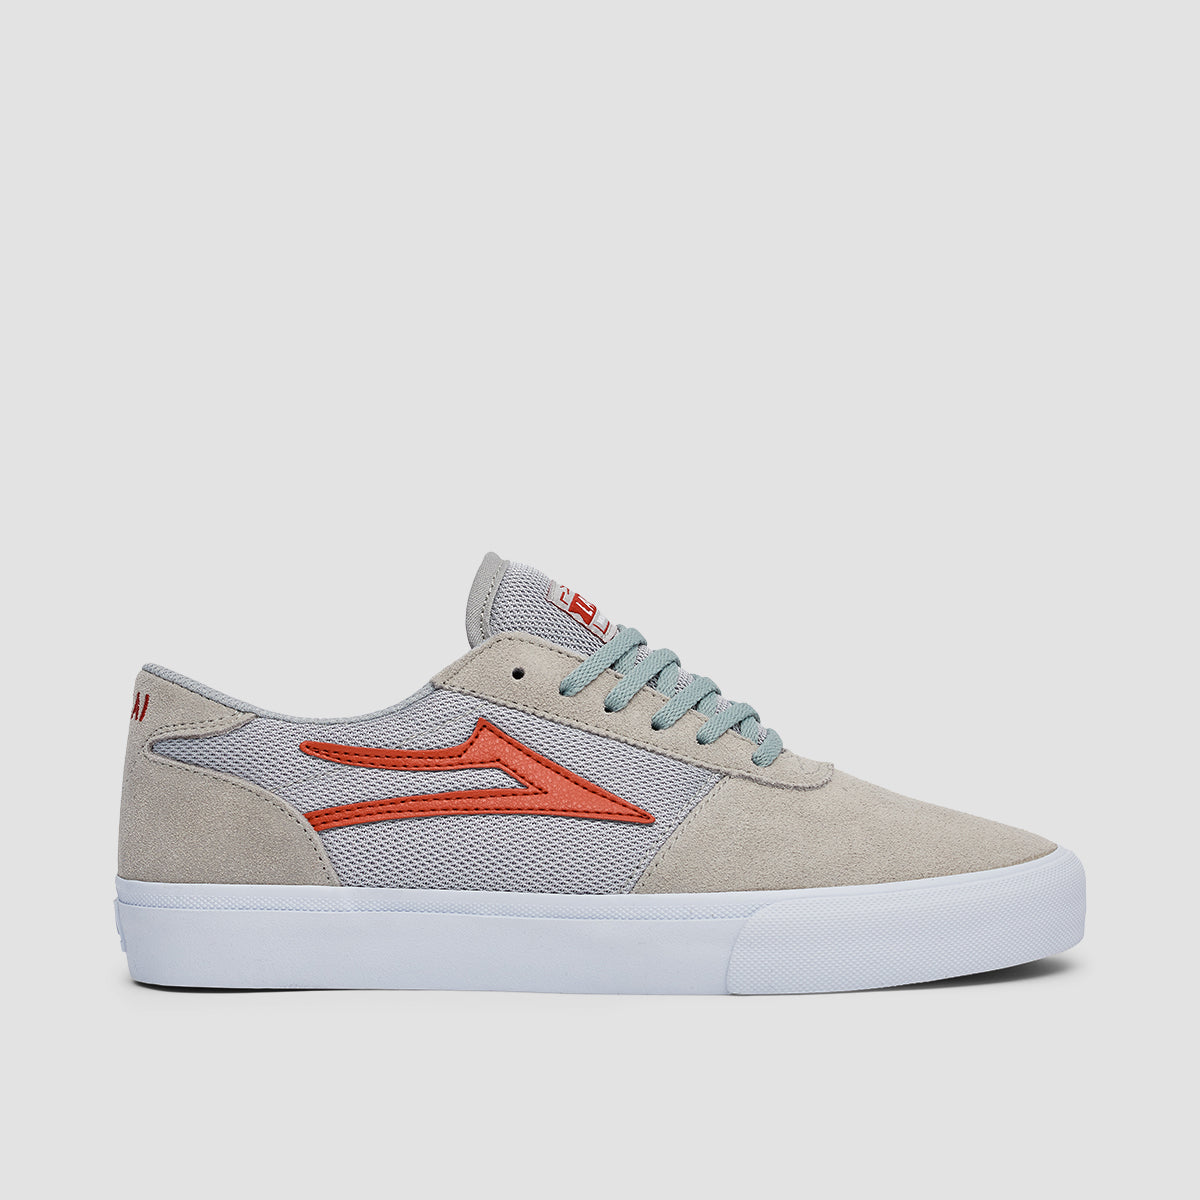 Lakai Manchester Shoes - Grey/Red Suede